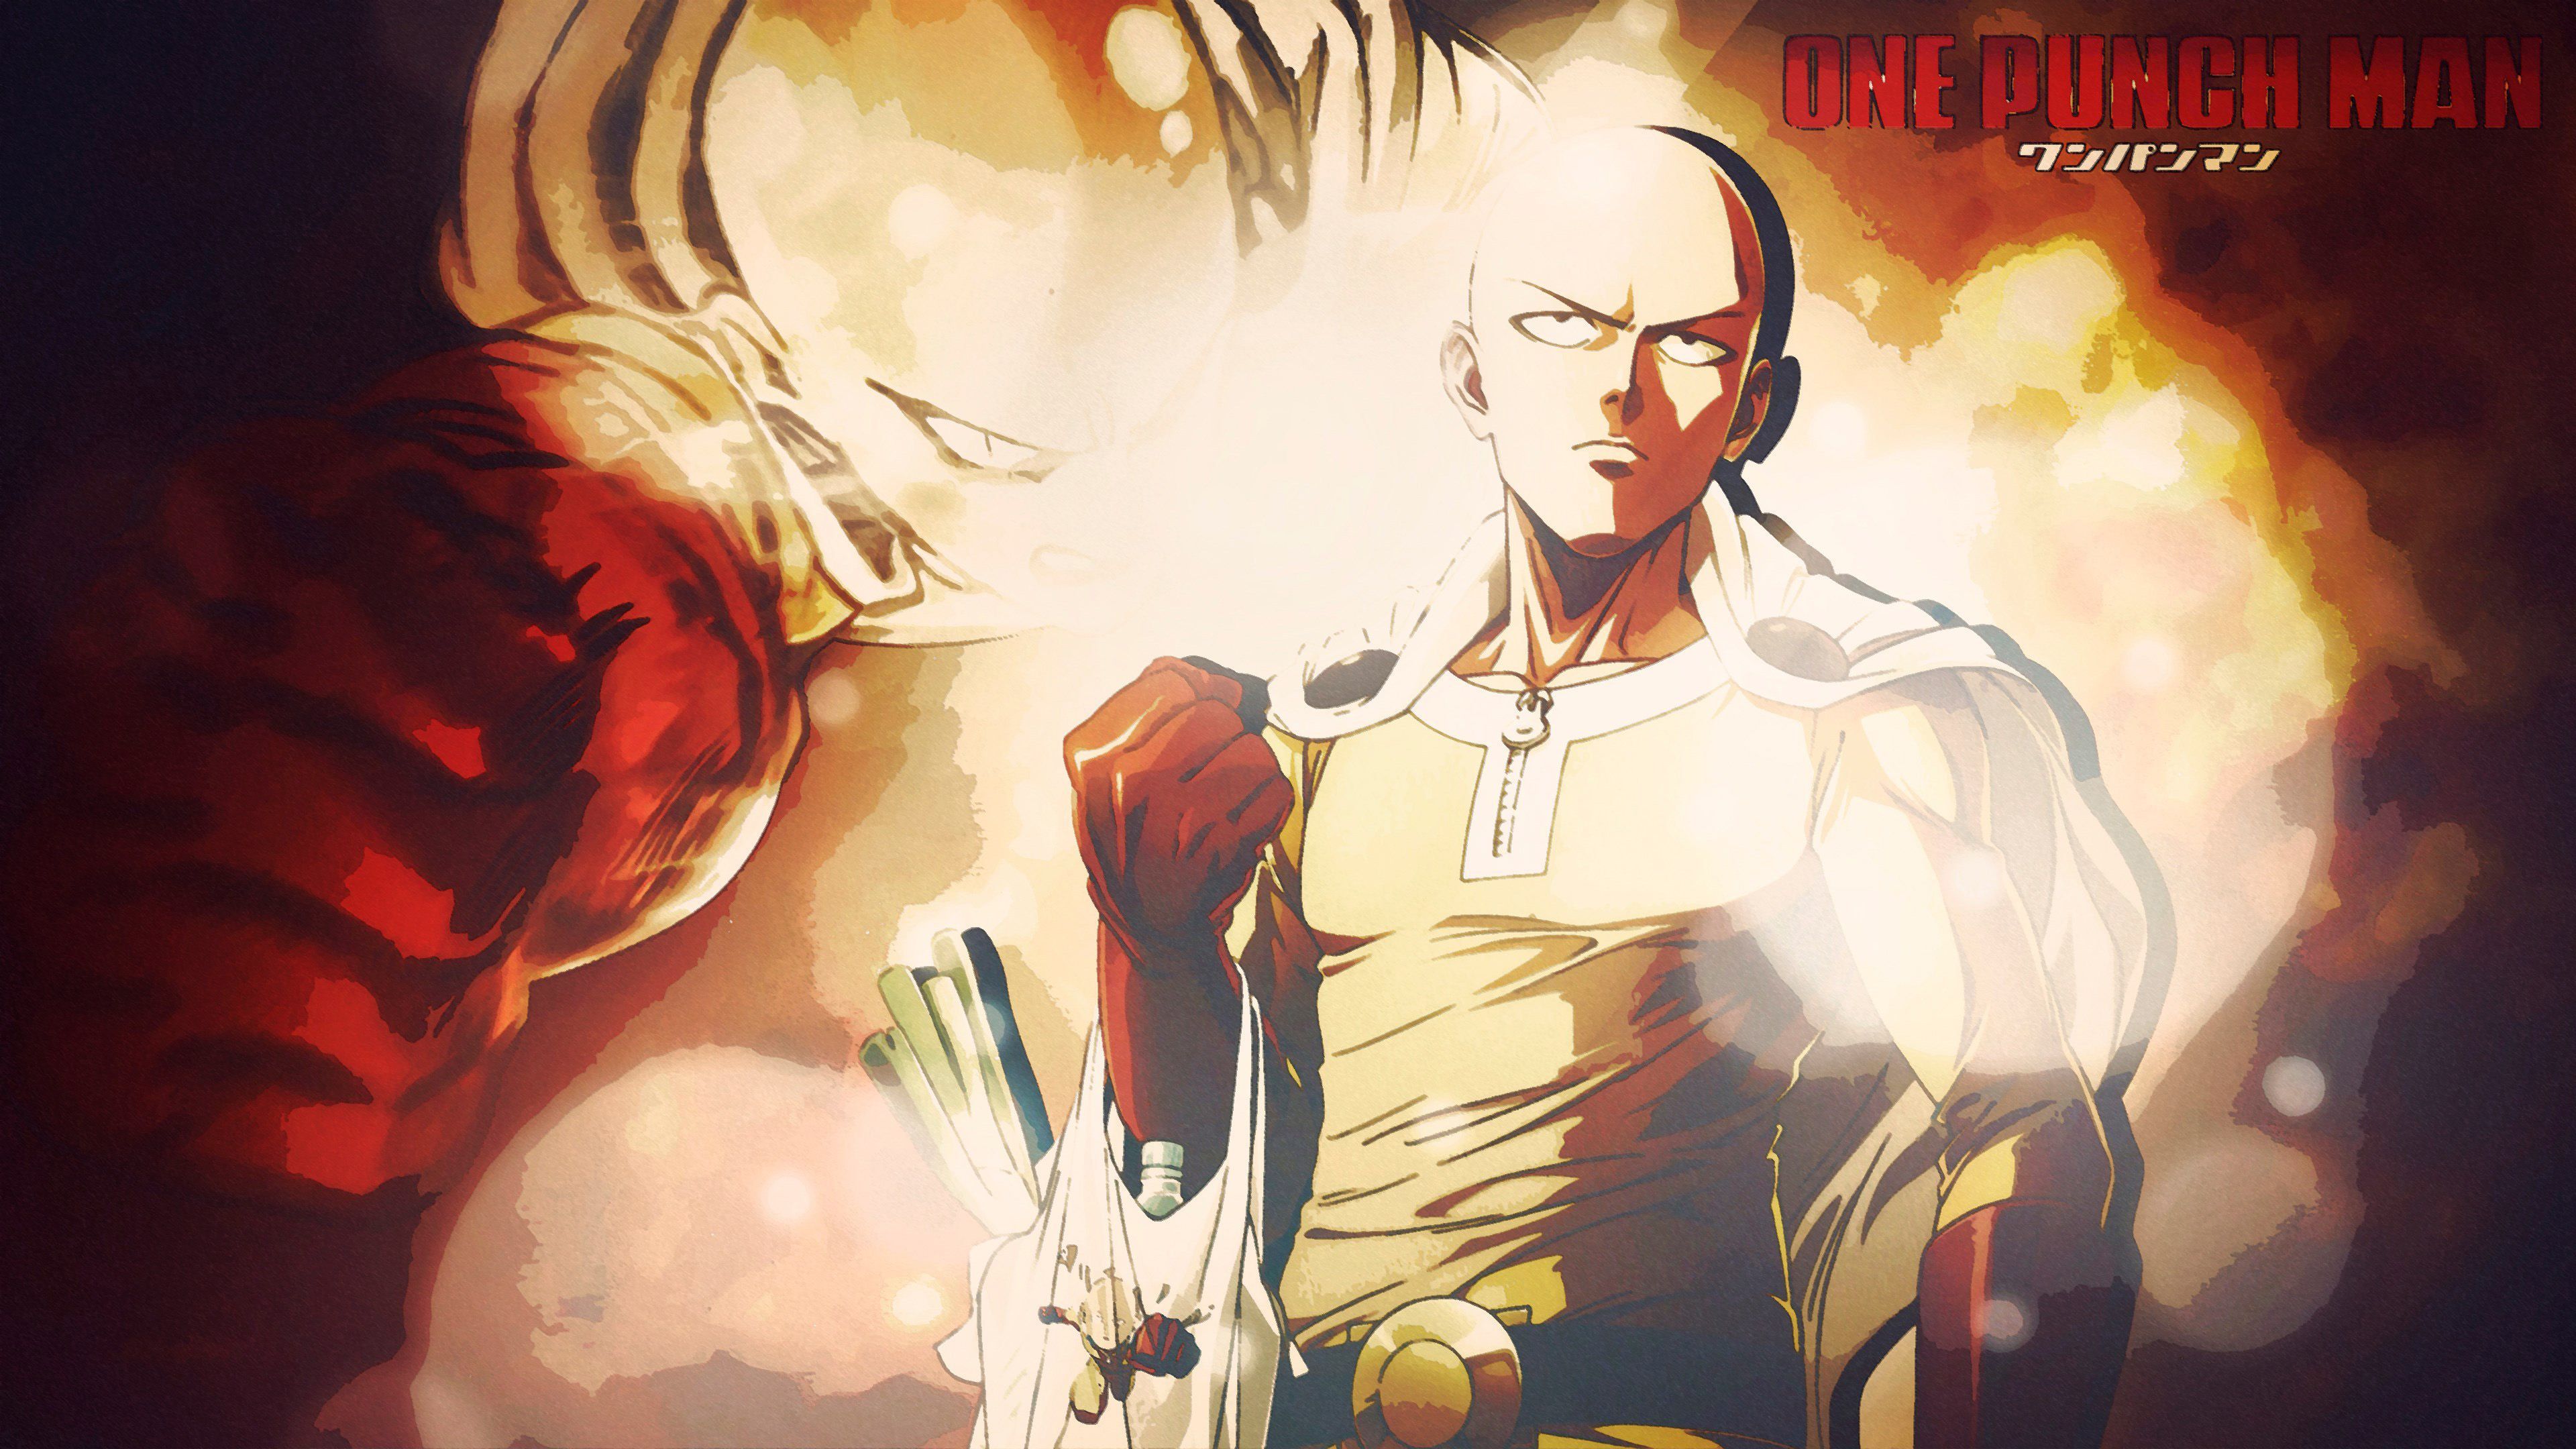 One Punch Man wallpapers for desktop, download free One Punch Man